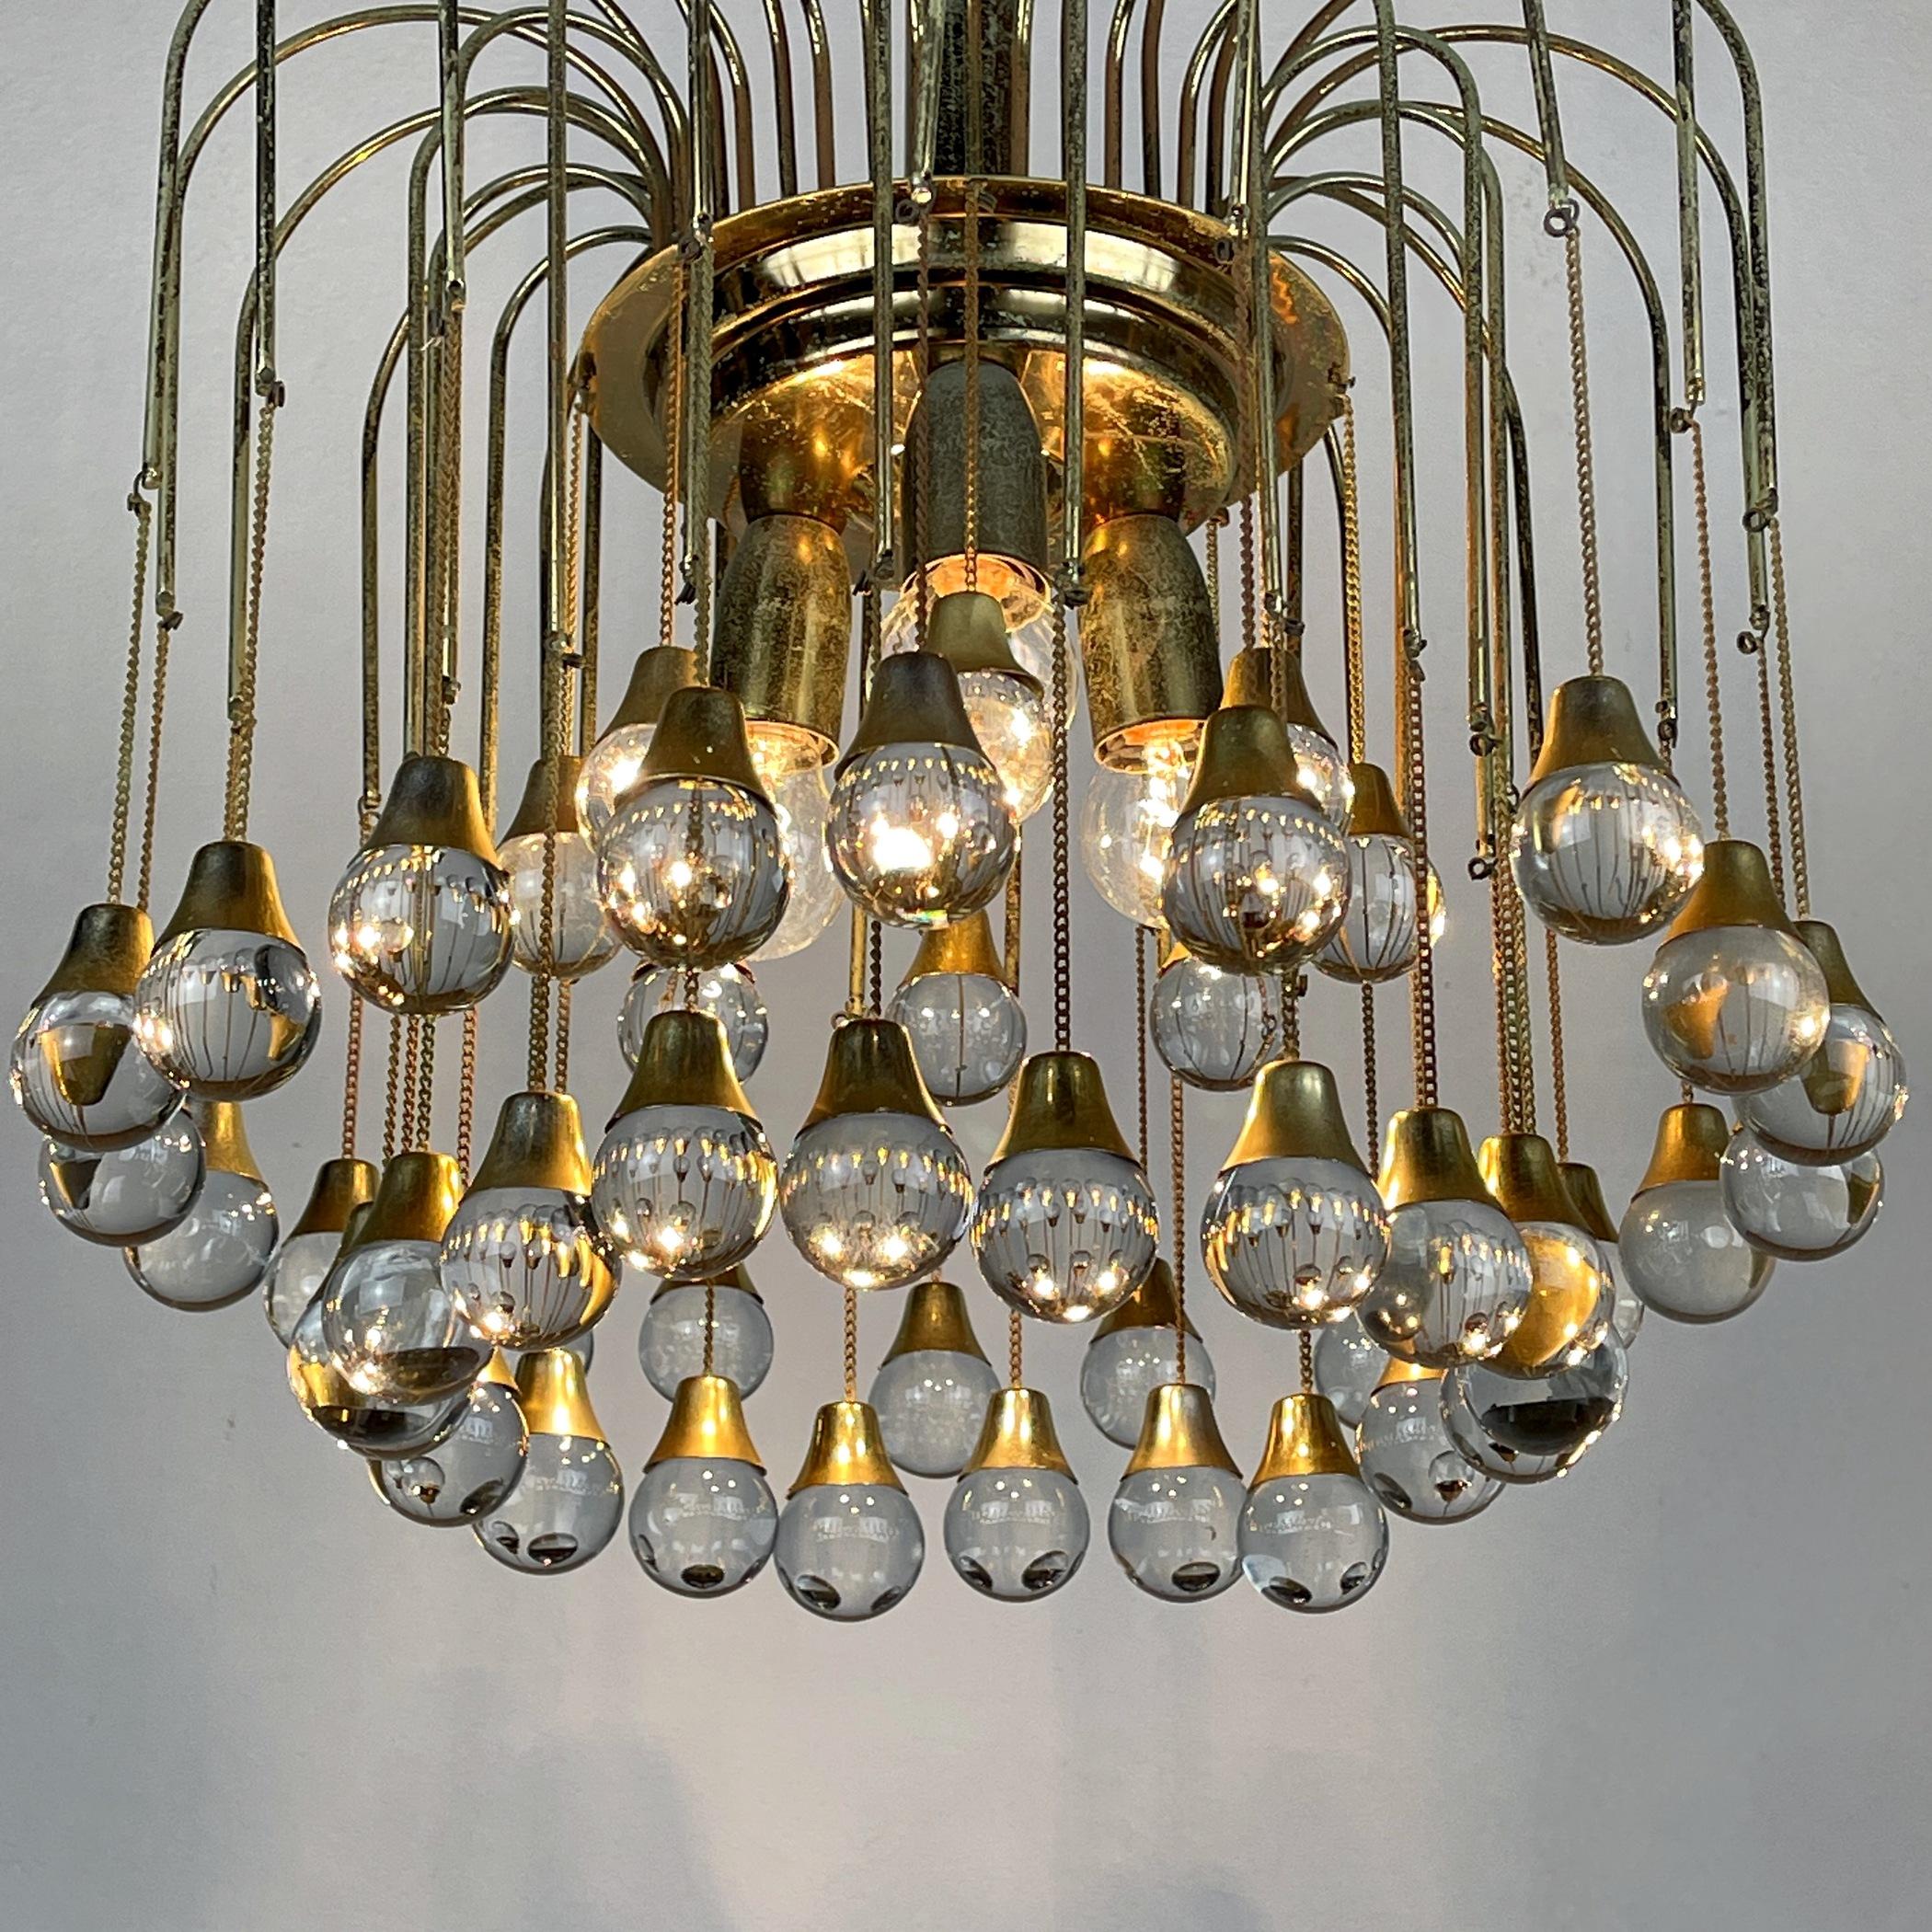 Vintage Cascade Glass Chandelier Italy 1960s Brass and 48 Glass Balls 1